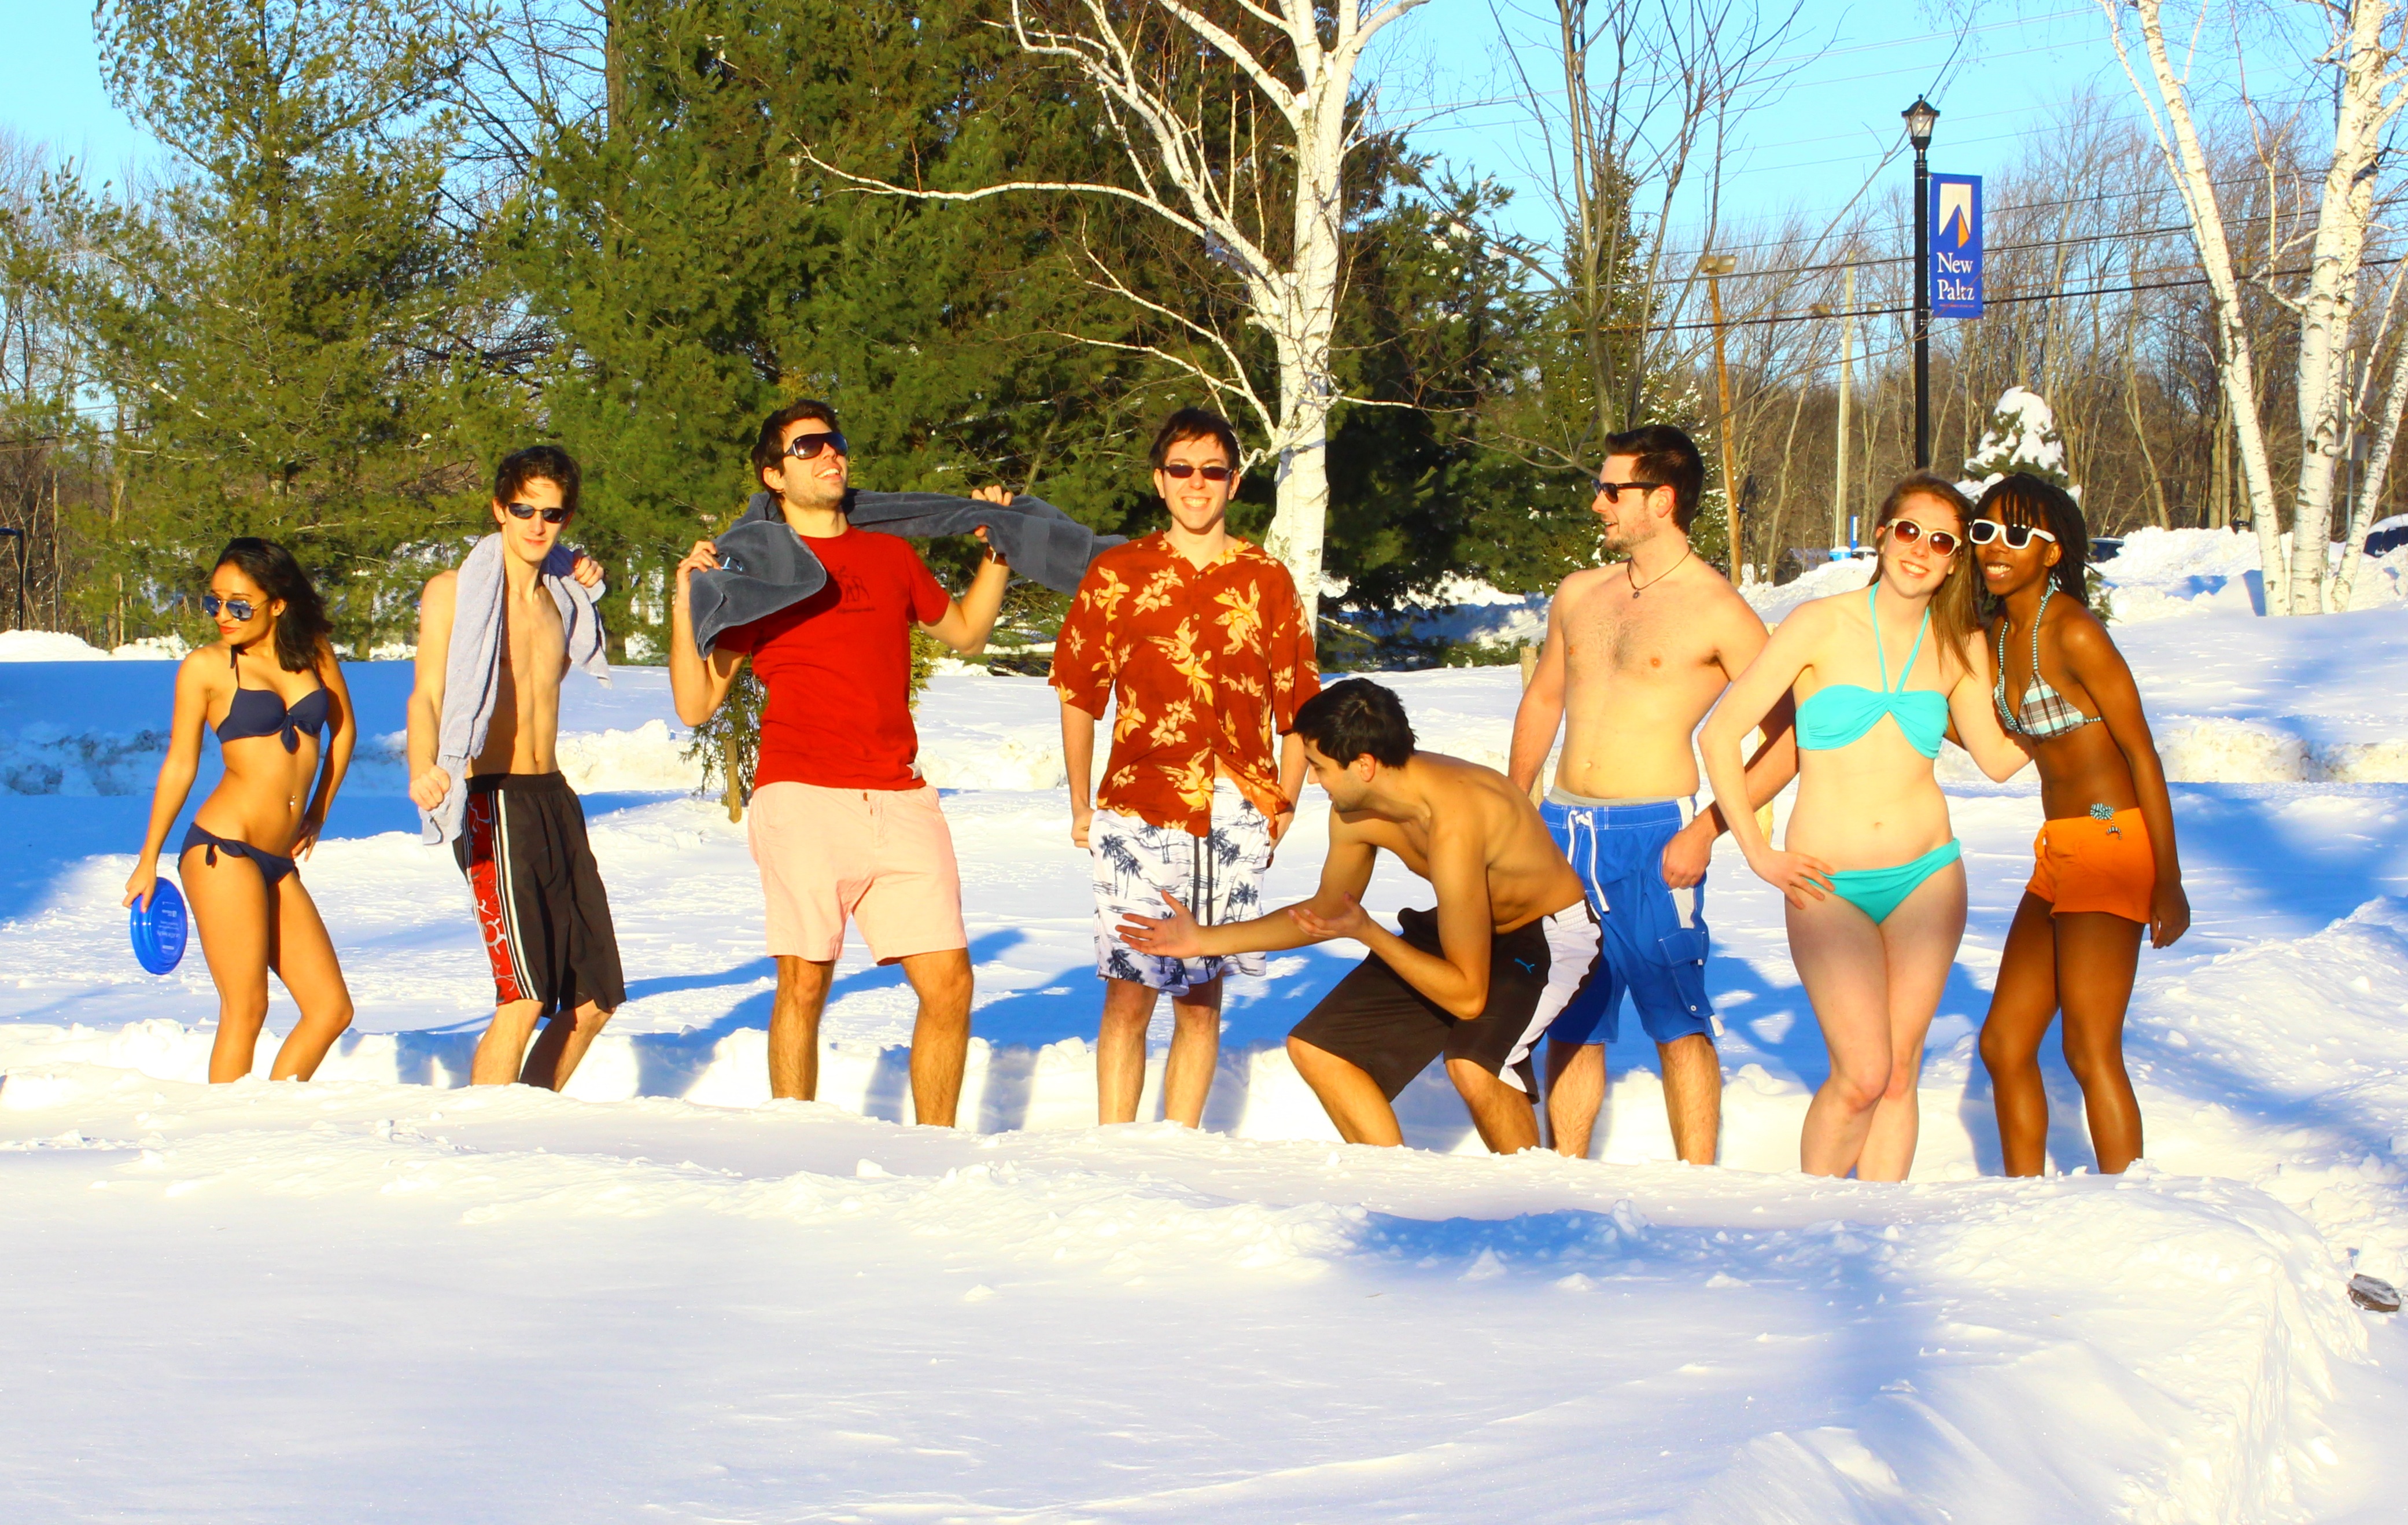 Ranysha Ware and her friends enjoy the snow day in their swimsuits. Photo courtesy of Temitayo Sodeke